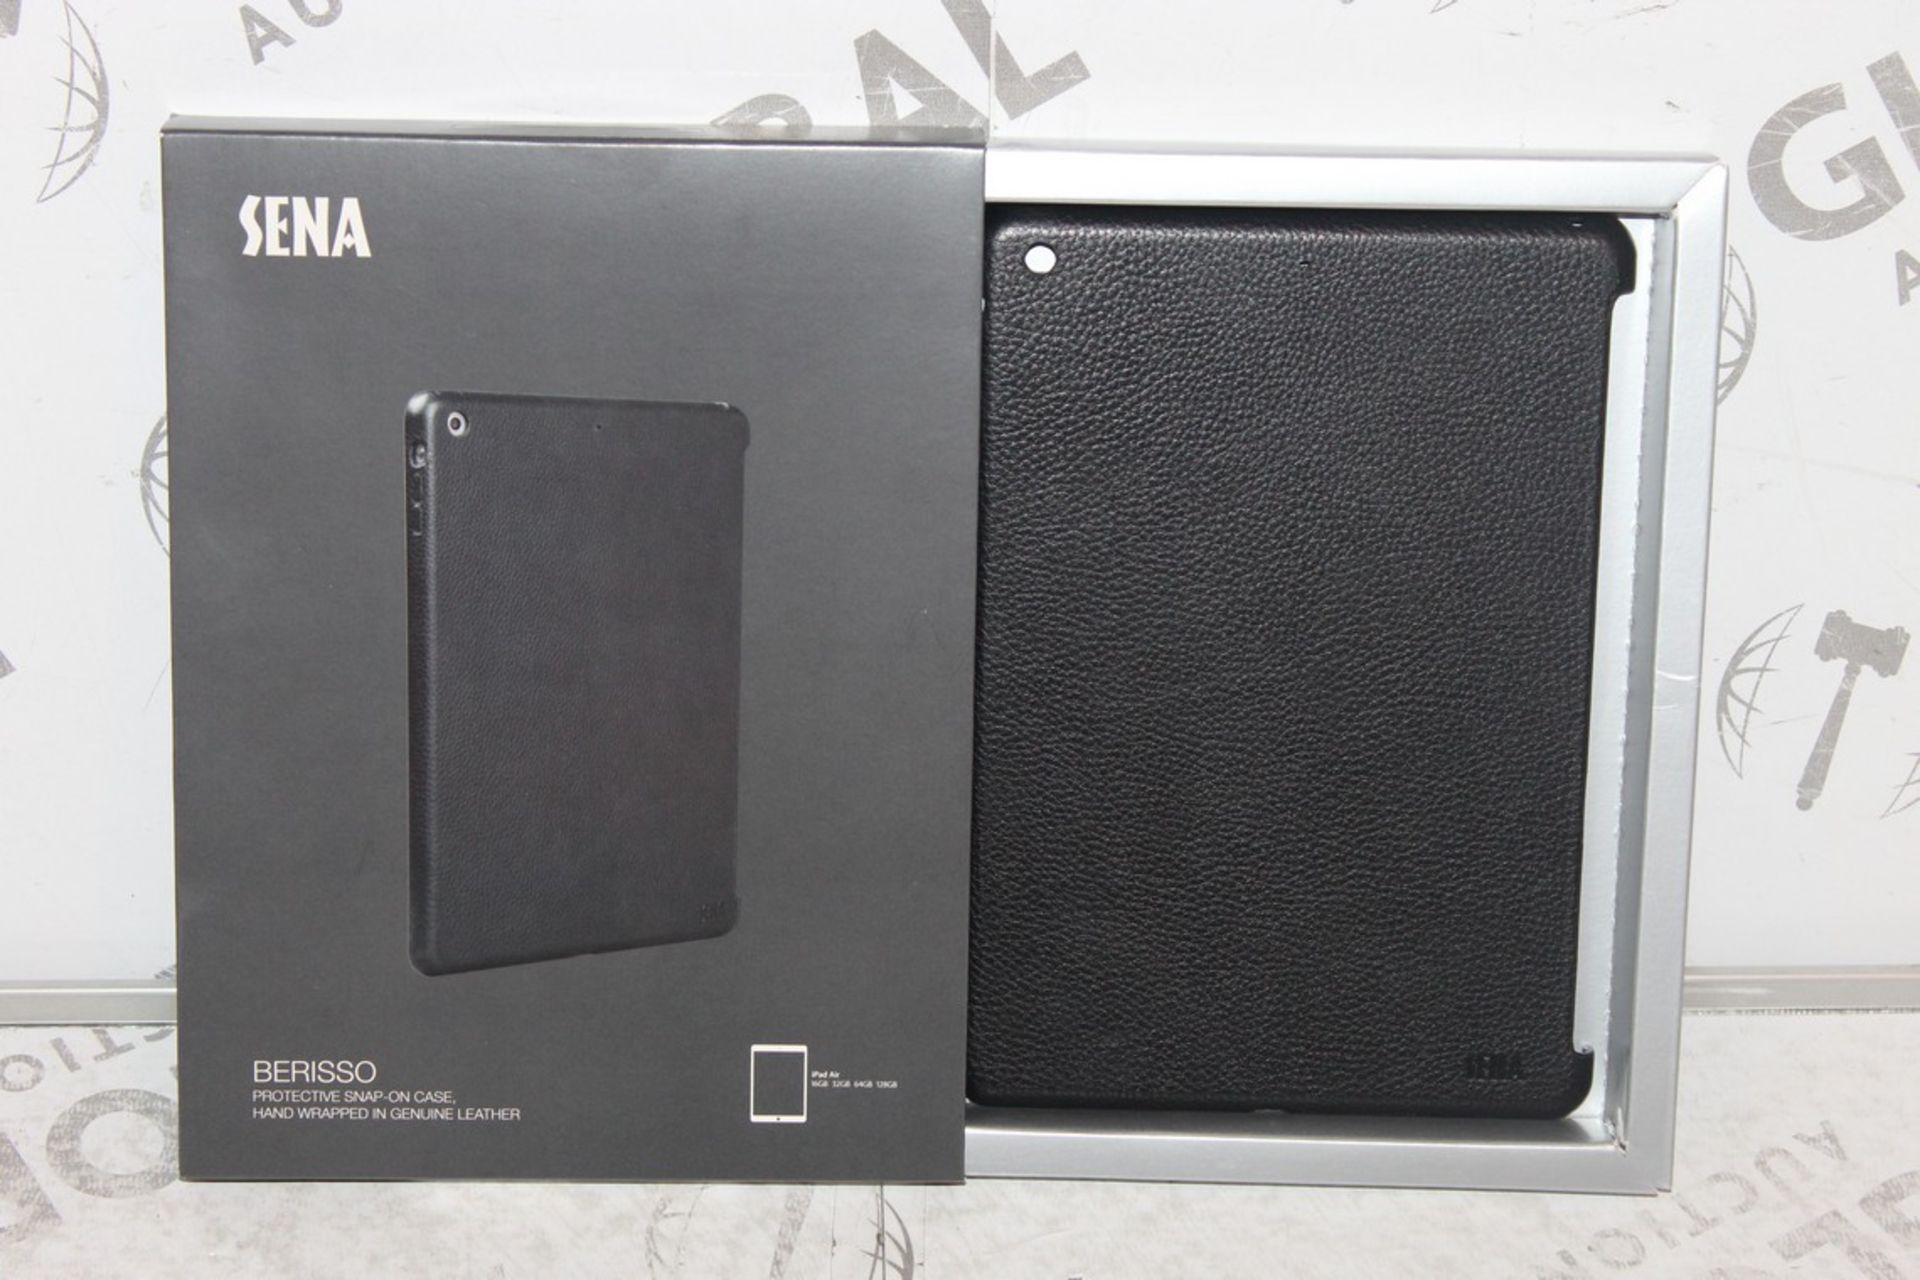 Lot to Contain 2 Brand New Sena Berisso Protective Ipad Air Snap On Leather Cases Combined RRP £90